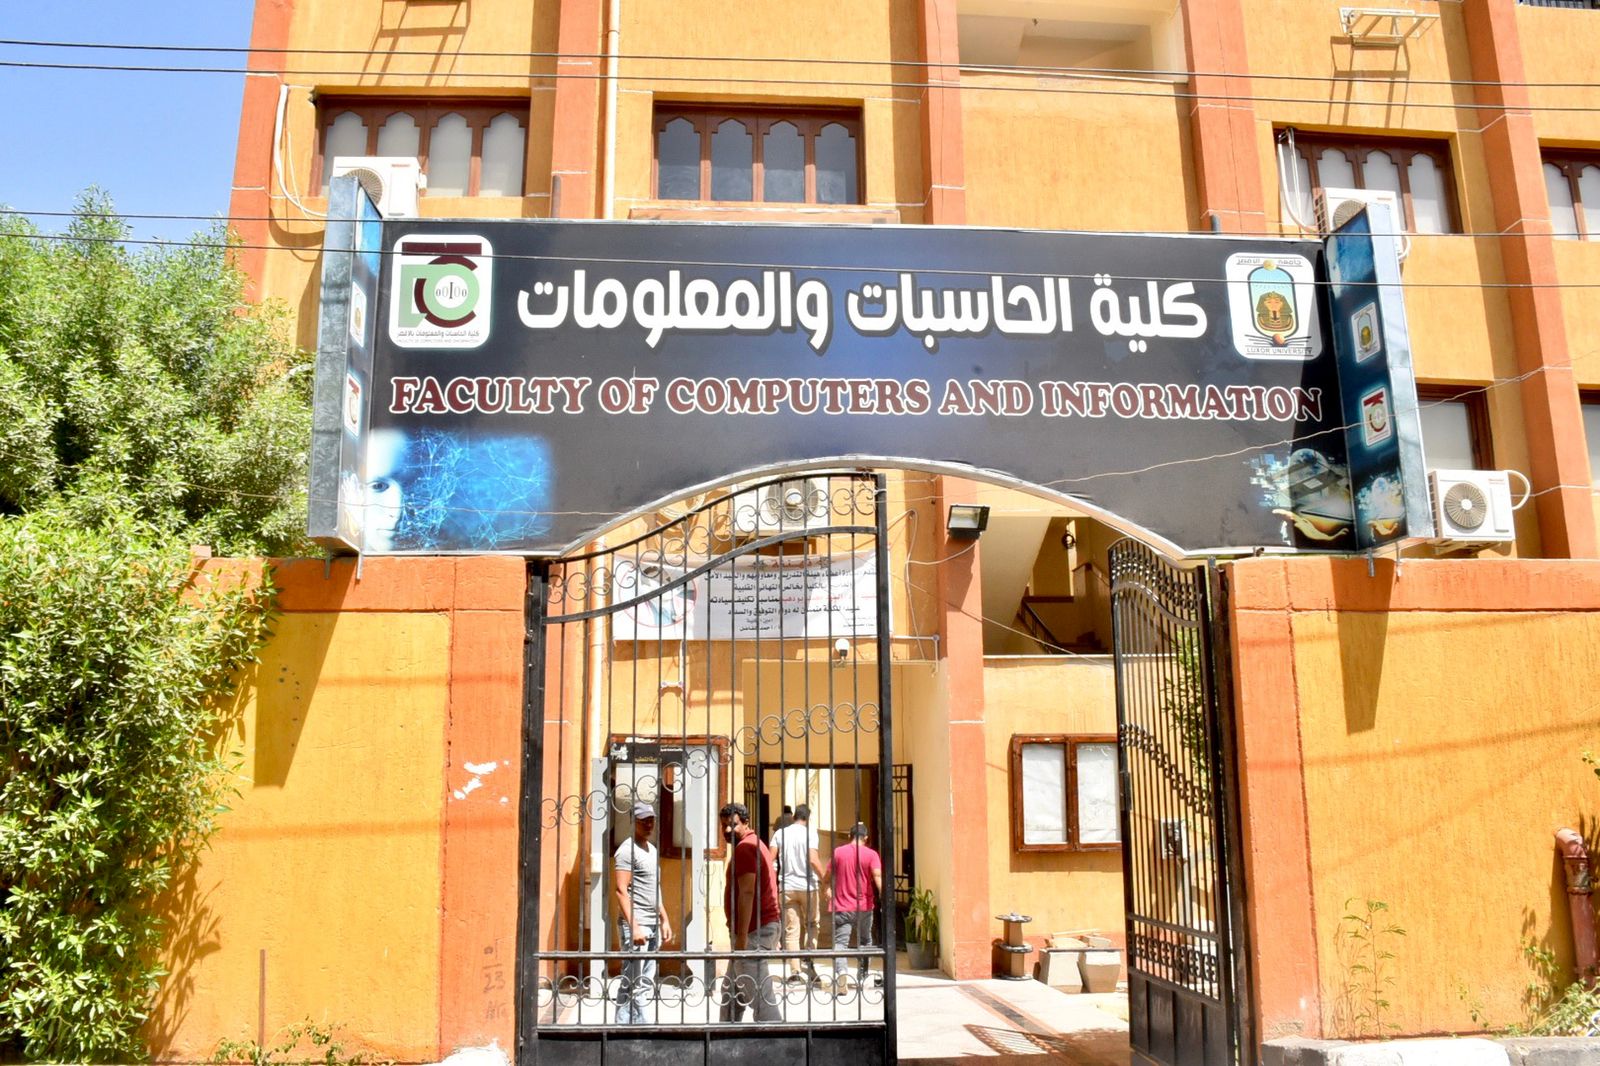 Luxor University - Faculty of Computers and Information